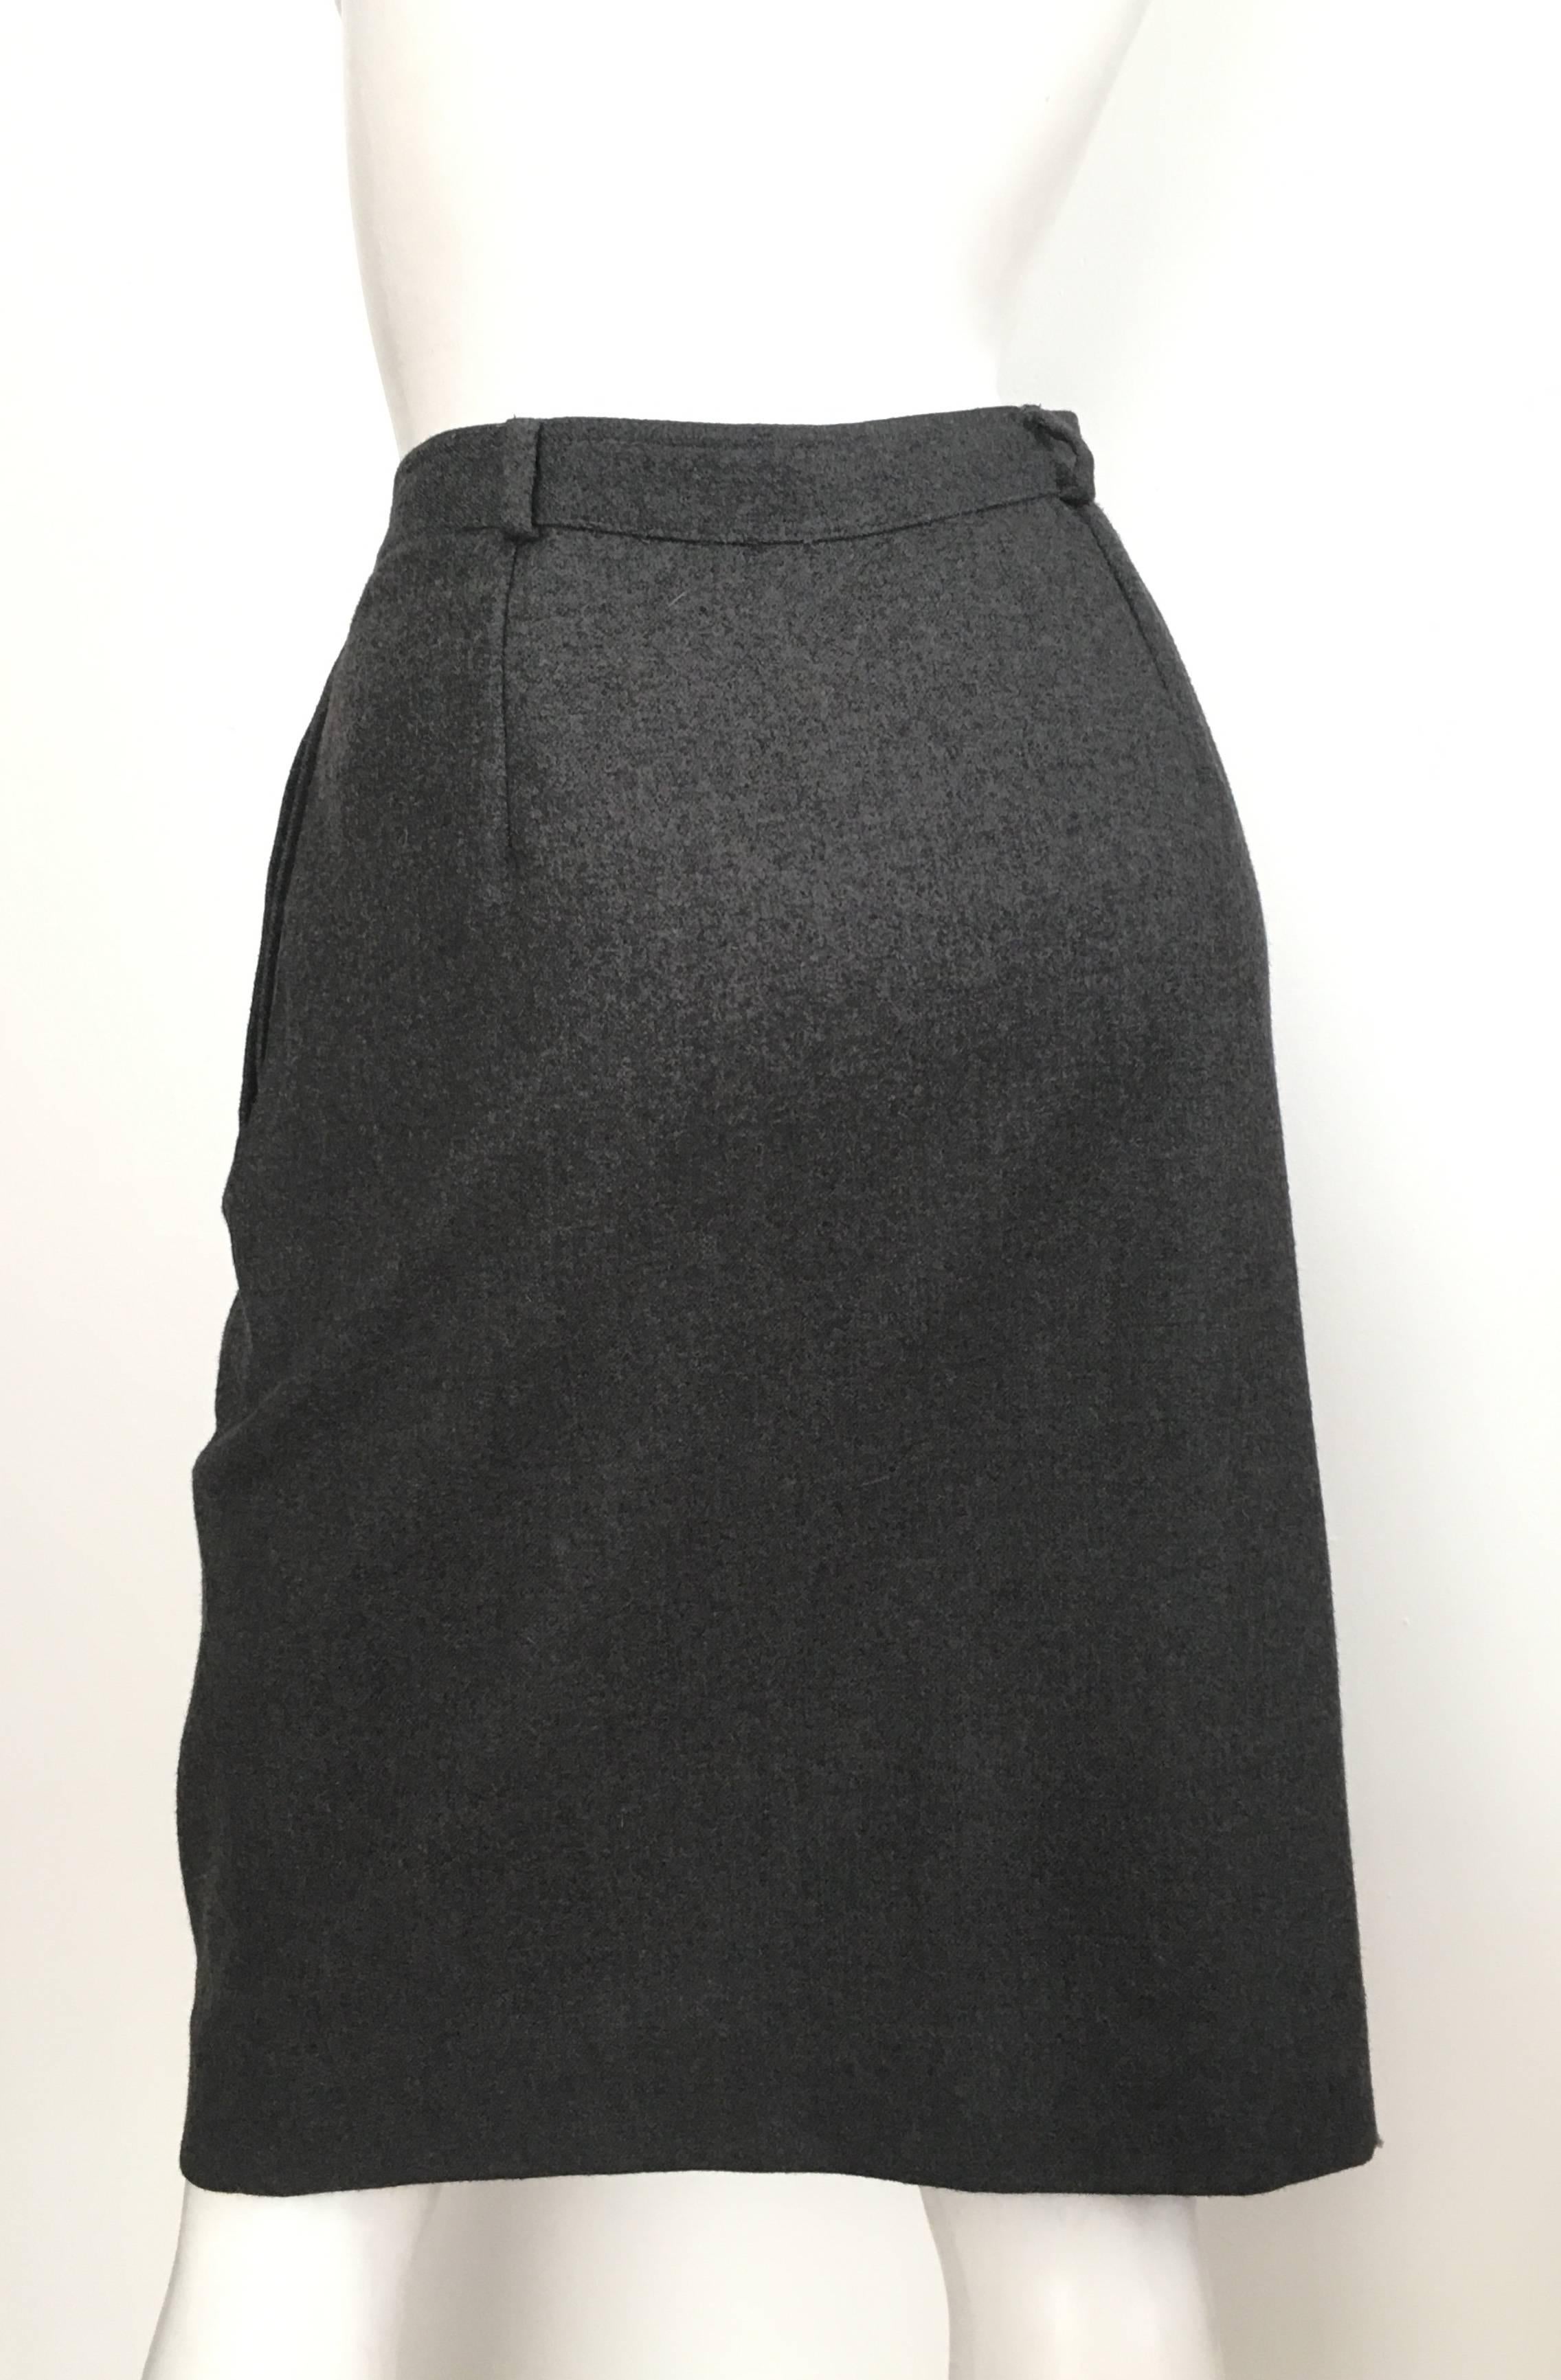 Women's or Men's Valentino Grey Wool Pencil Skirt with Pockets Size 10 / 46. For Sale